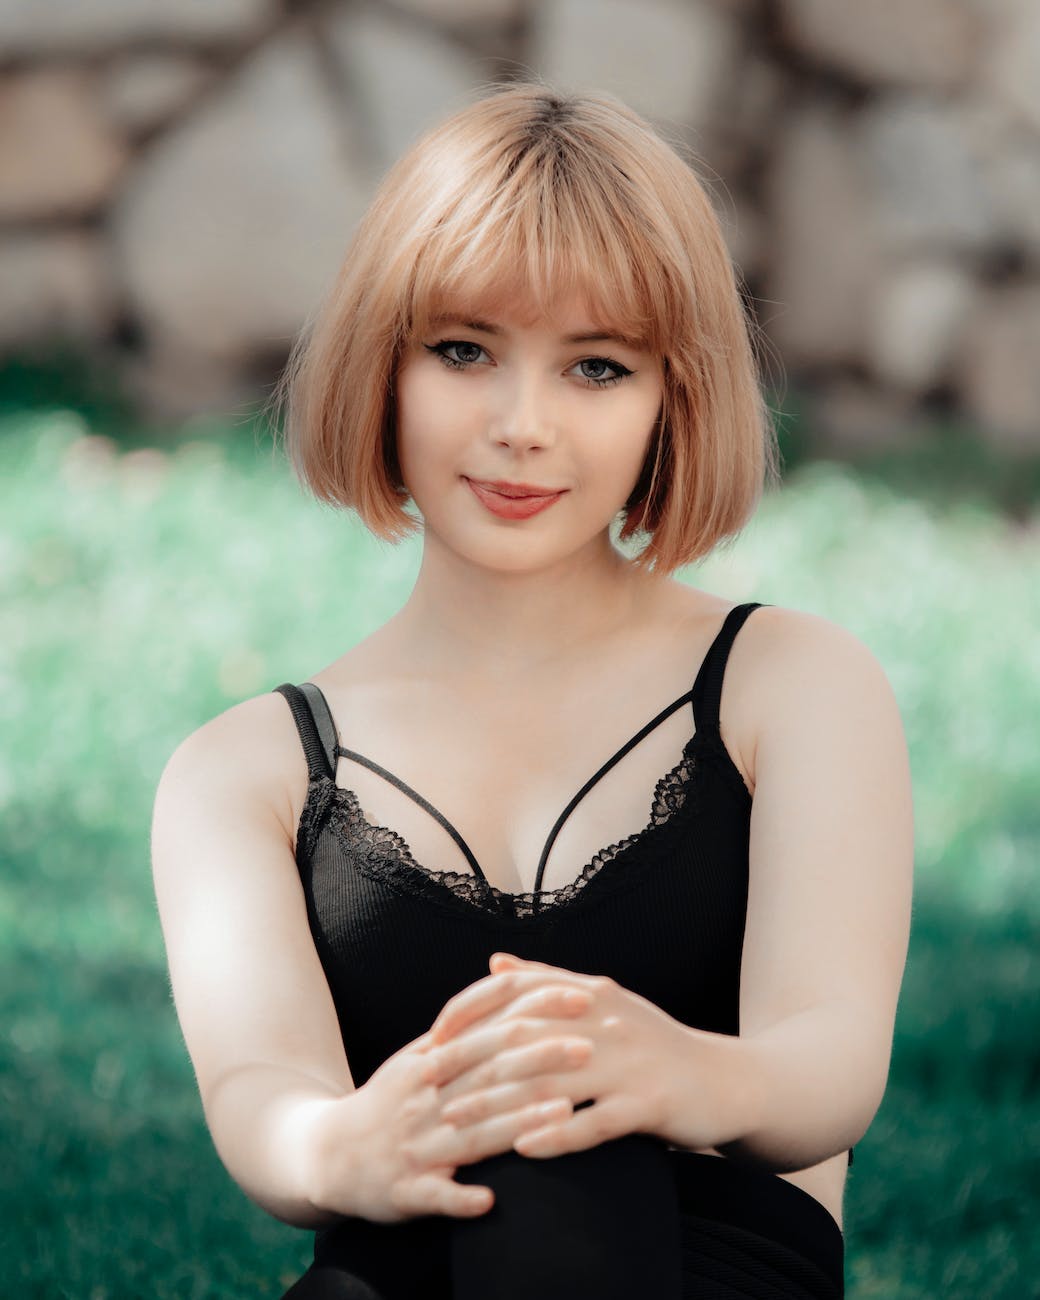 portrait of a woman in black bralette posing with hands on her knees